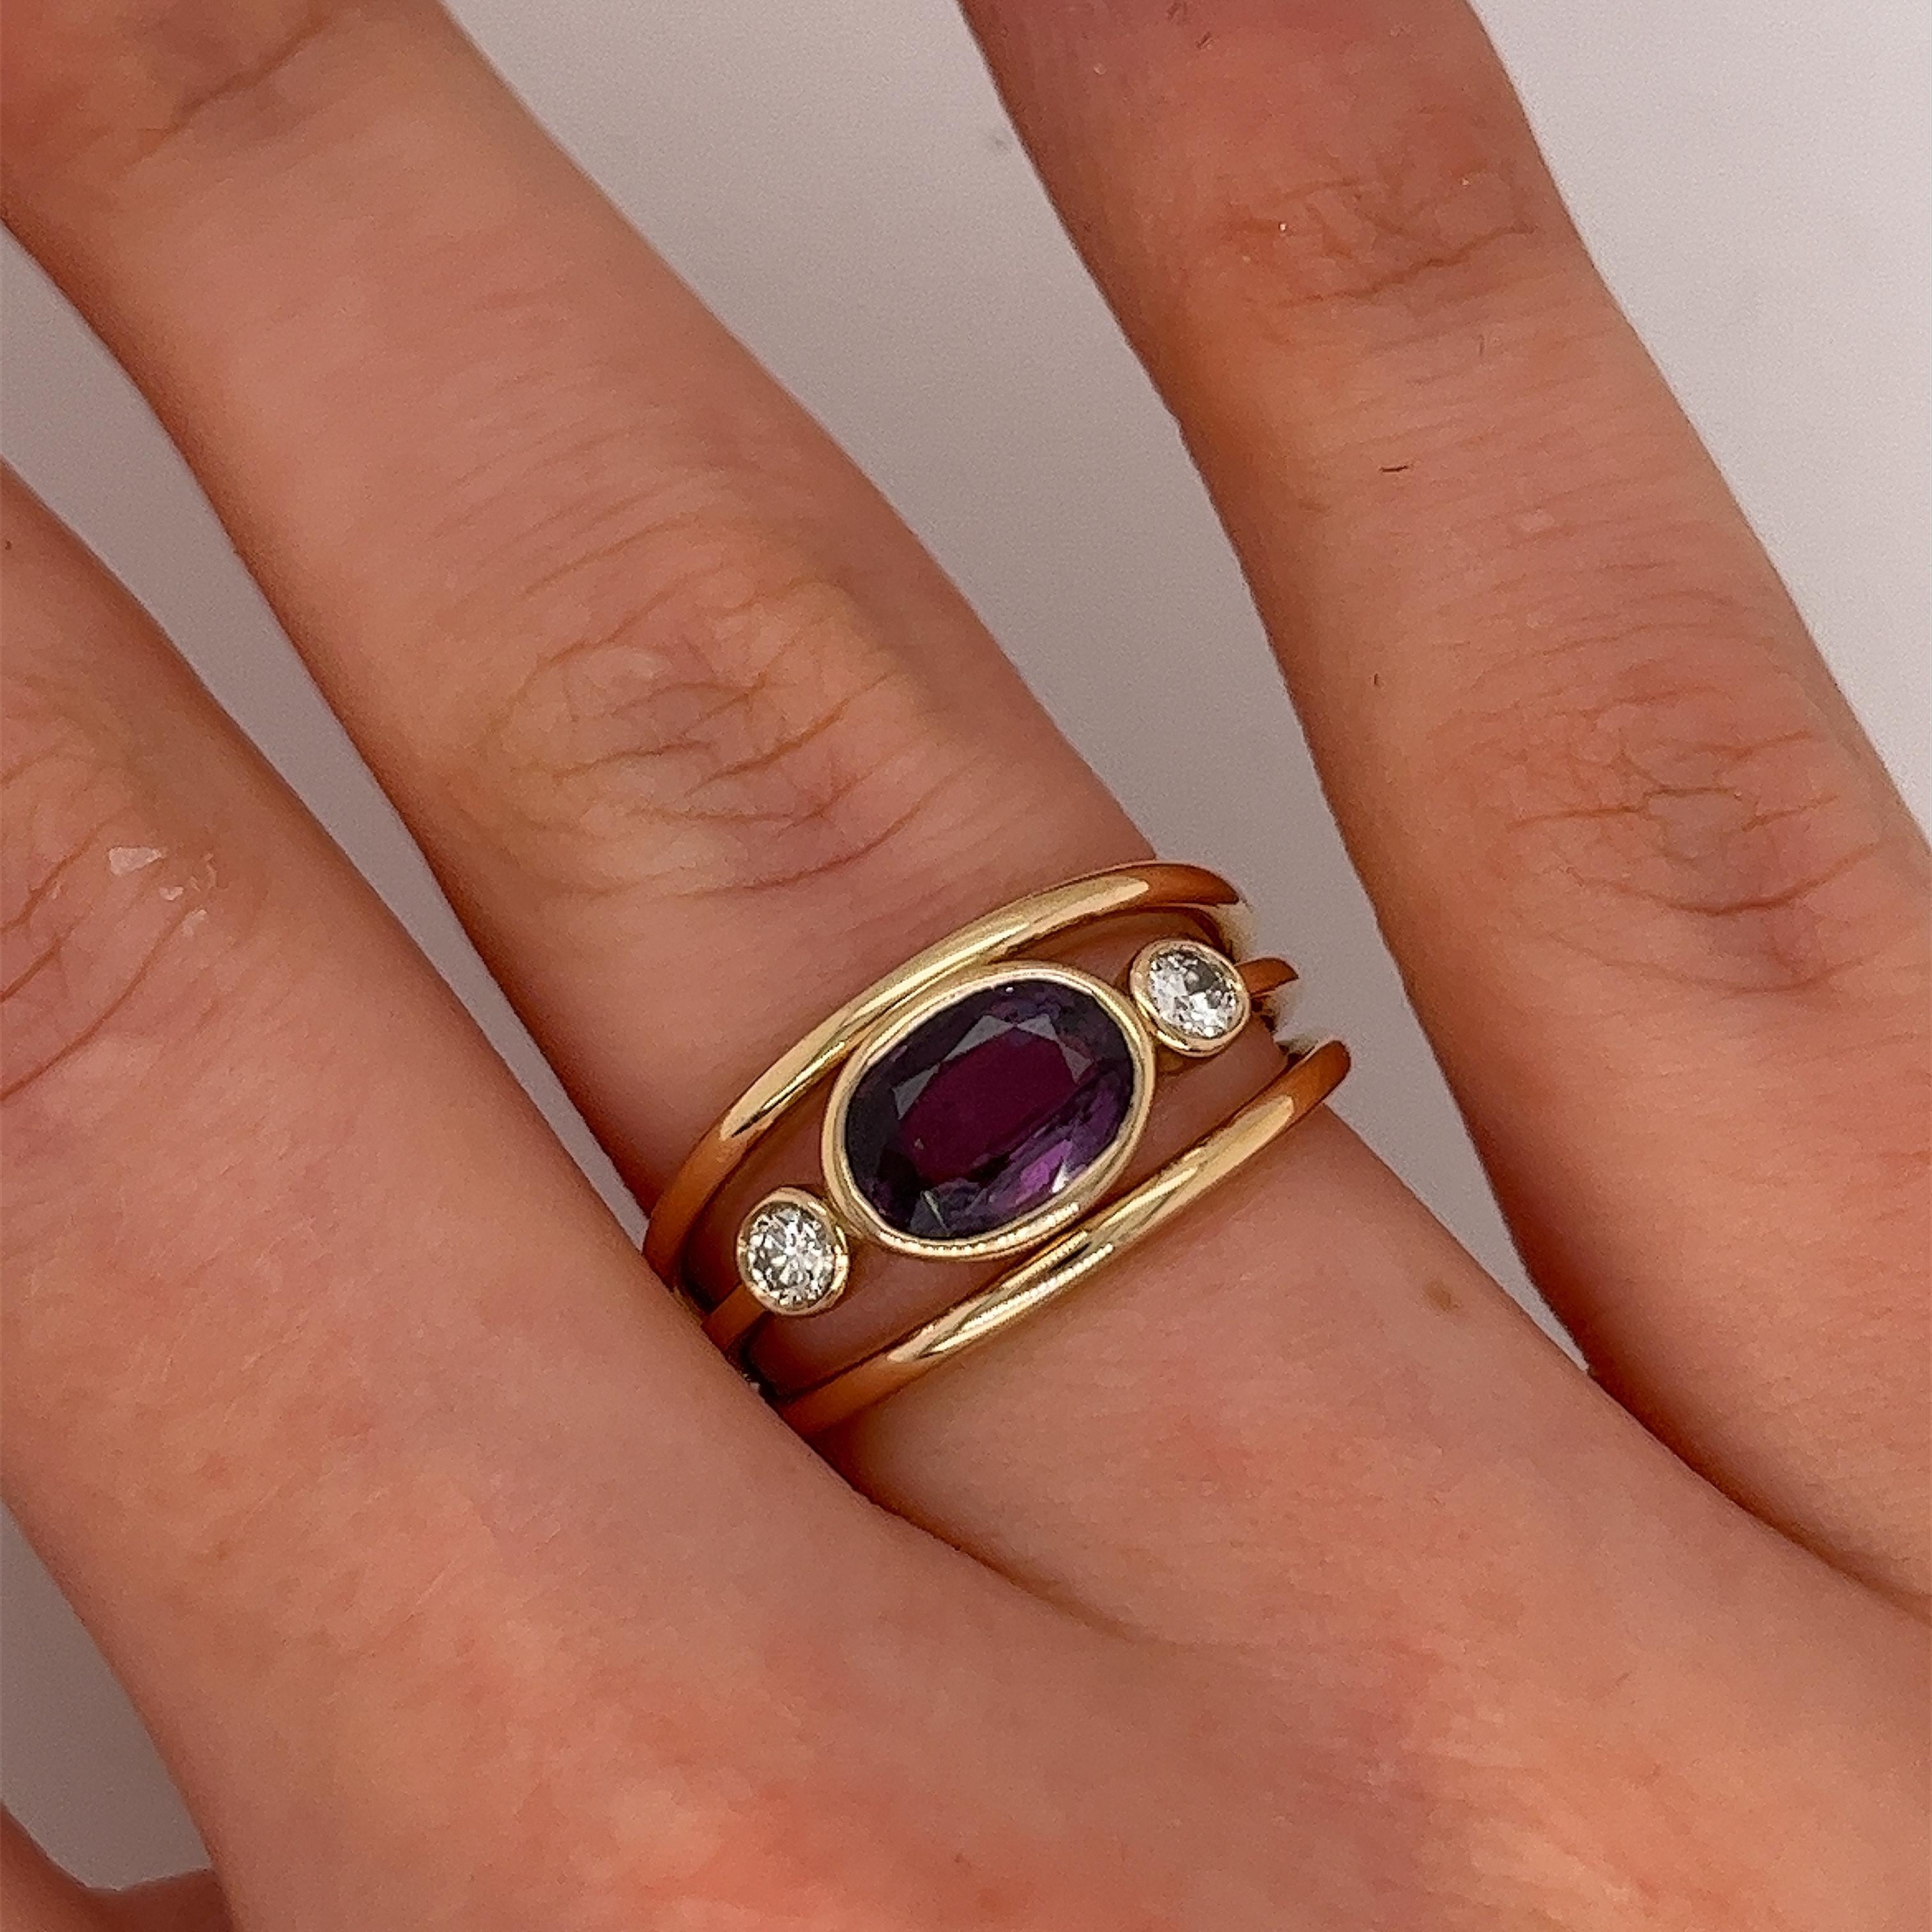 An elegant ruby and diamond ring, set with 2 round brilliant cut natural diamonds, 
and 1.16ct natural oval ruby, in a 14ct yellow-gold 3-row bezel setting.
Total Diamond Weight: 0.16ct
Diamond Colour: G/H
Diamond Clarity: SI1
Total Ruby Weight: